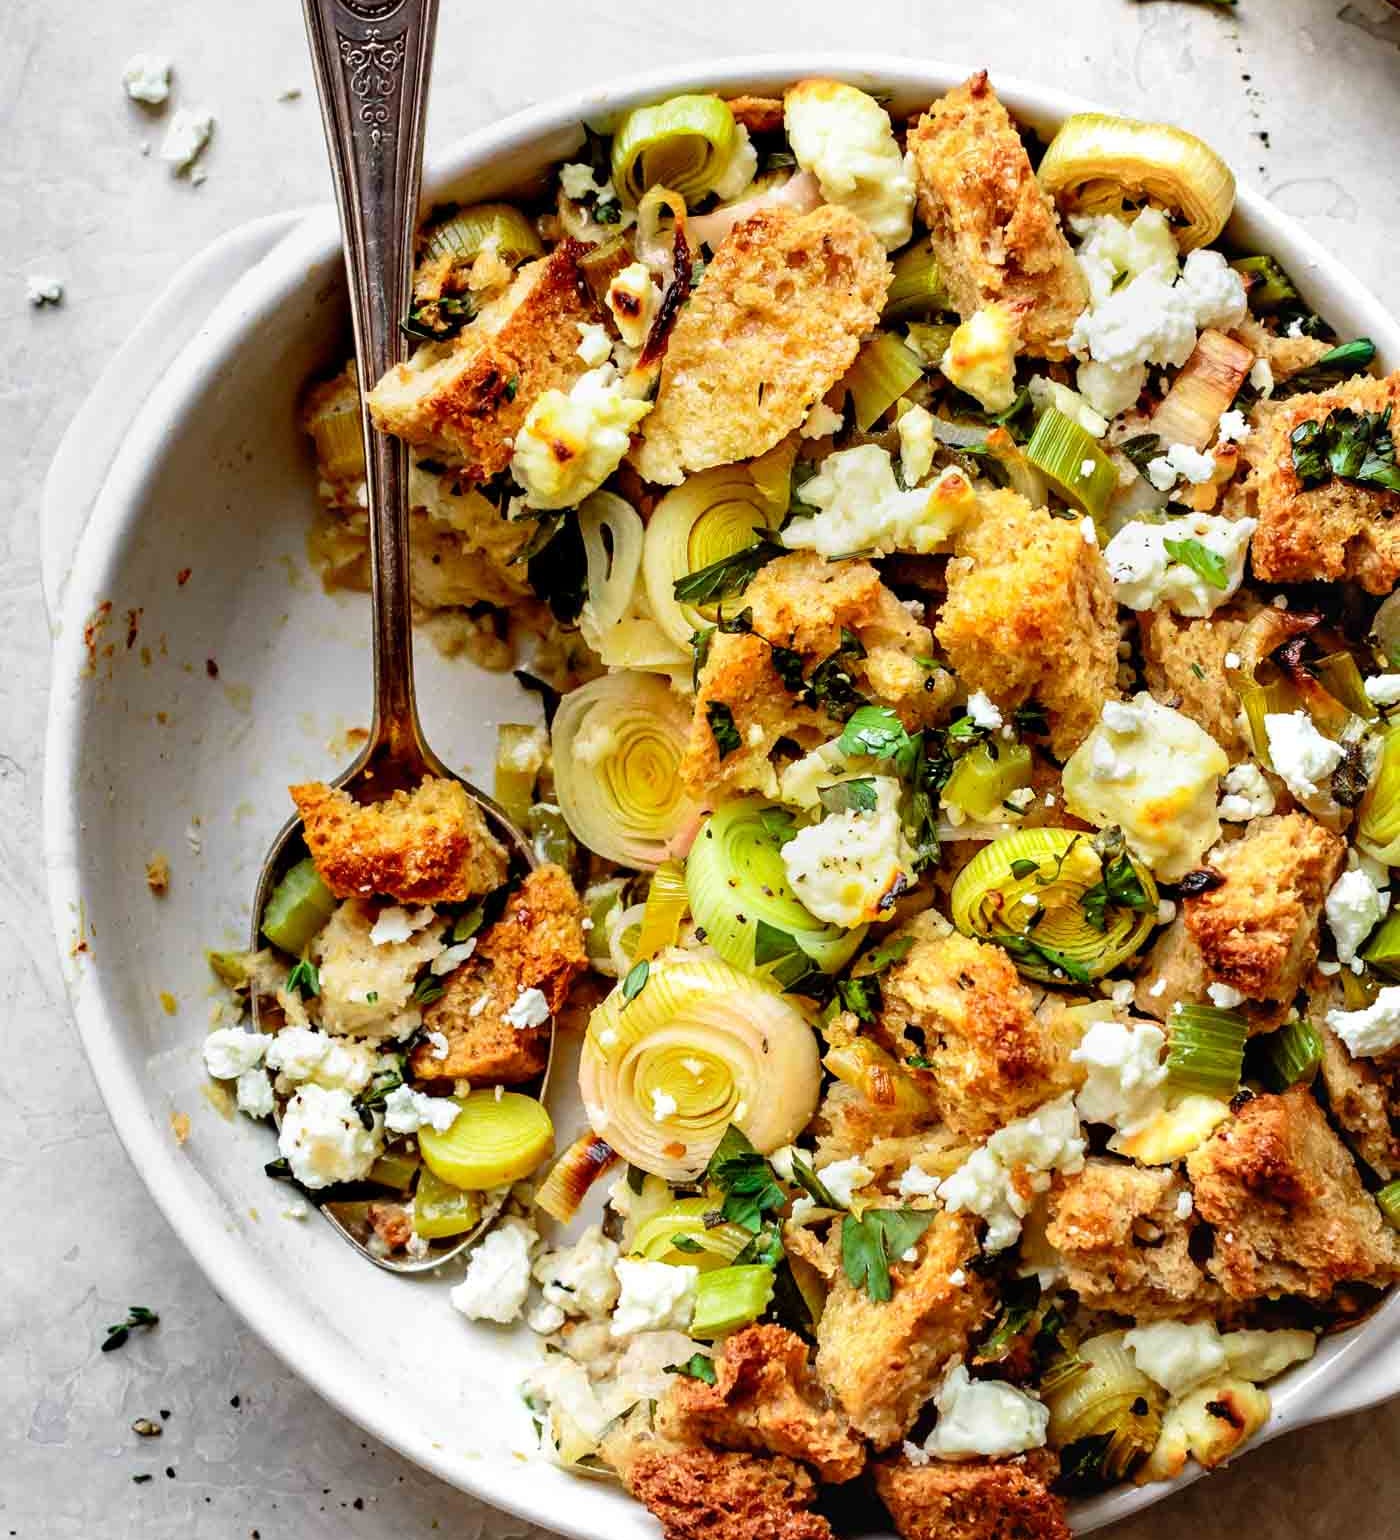 Gluten-Free Stuffing With With Leeks & Goat Cheese